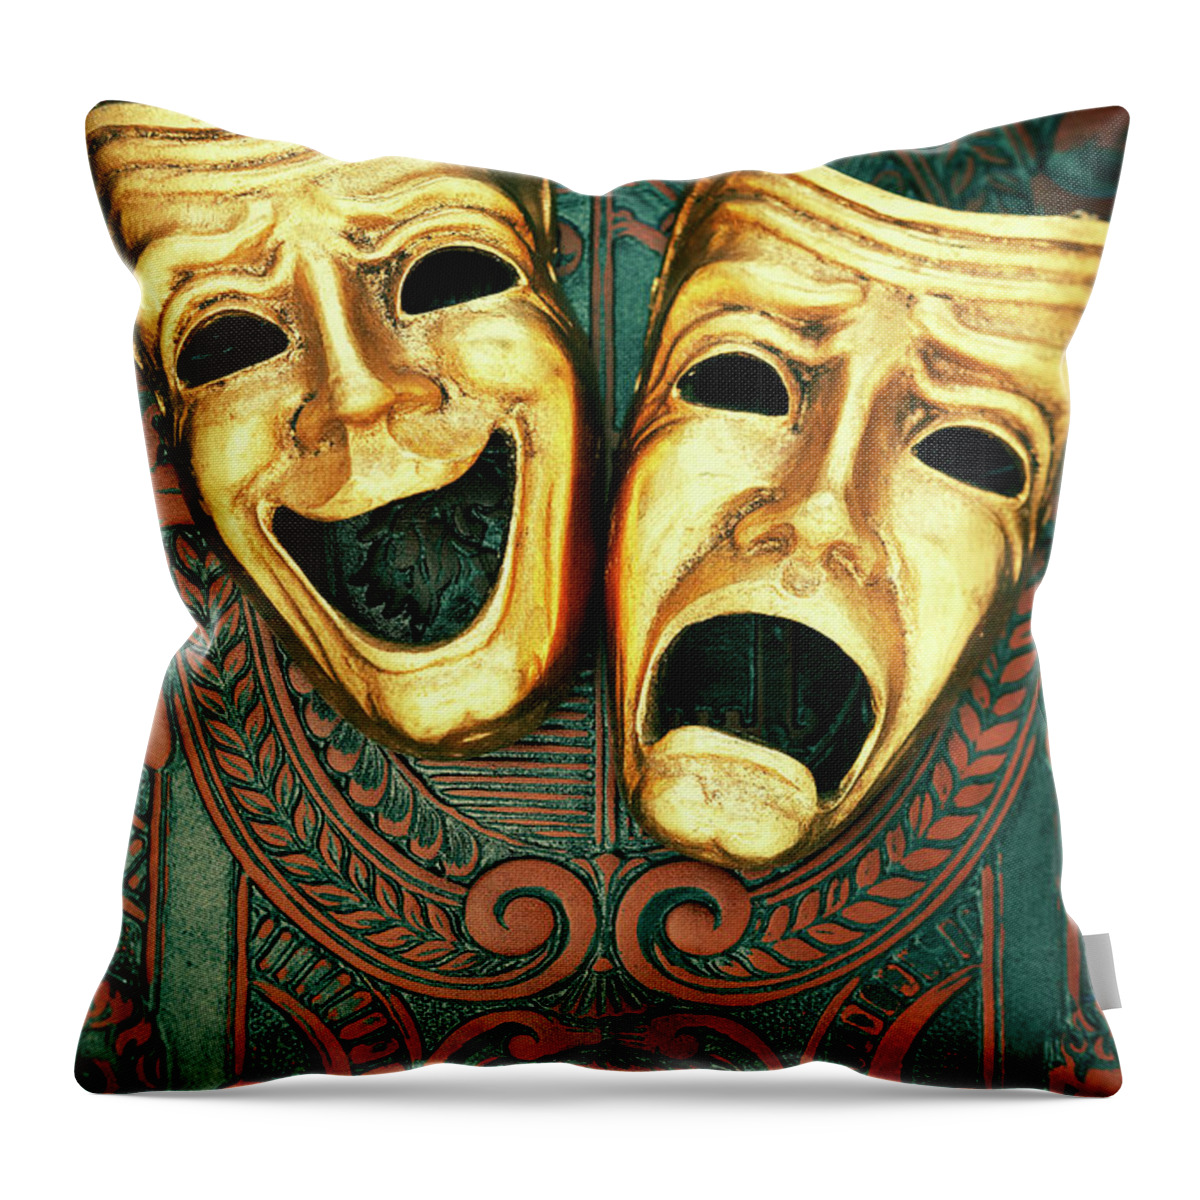 Leather Throw Pillow featuring the photograph Golden Comedy And Tragedy Masks On by David Muir